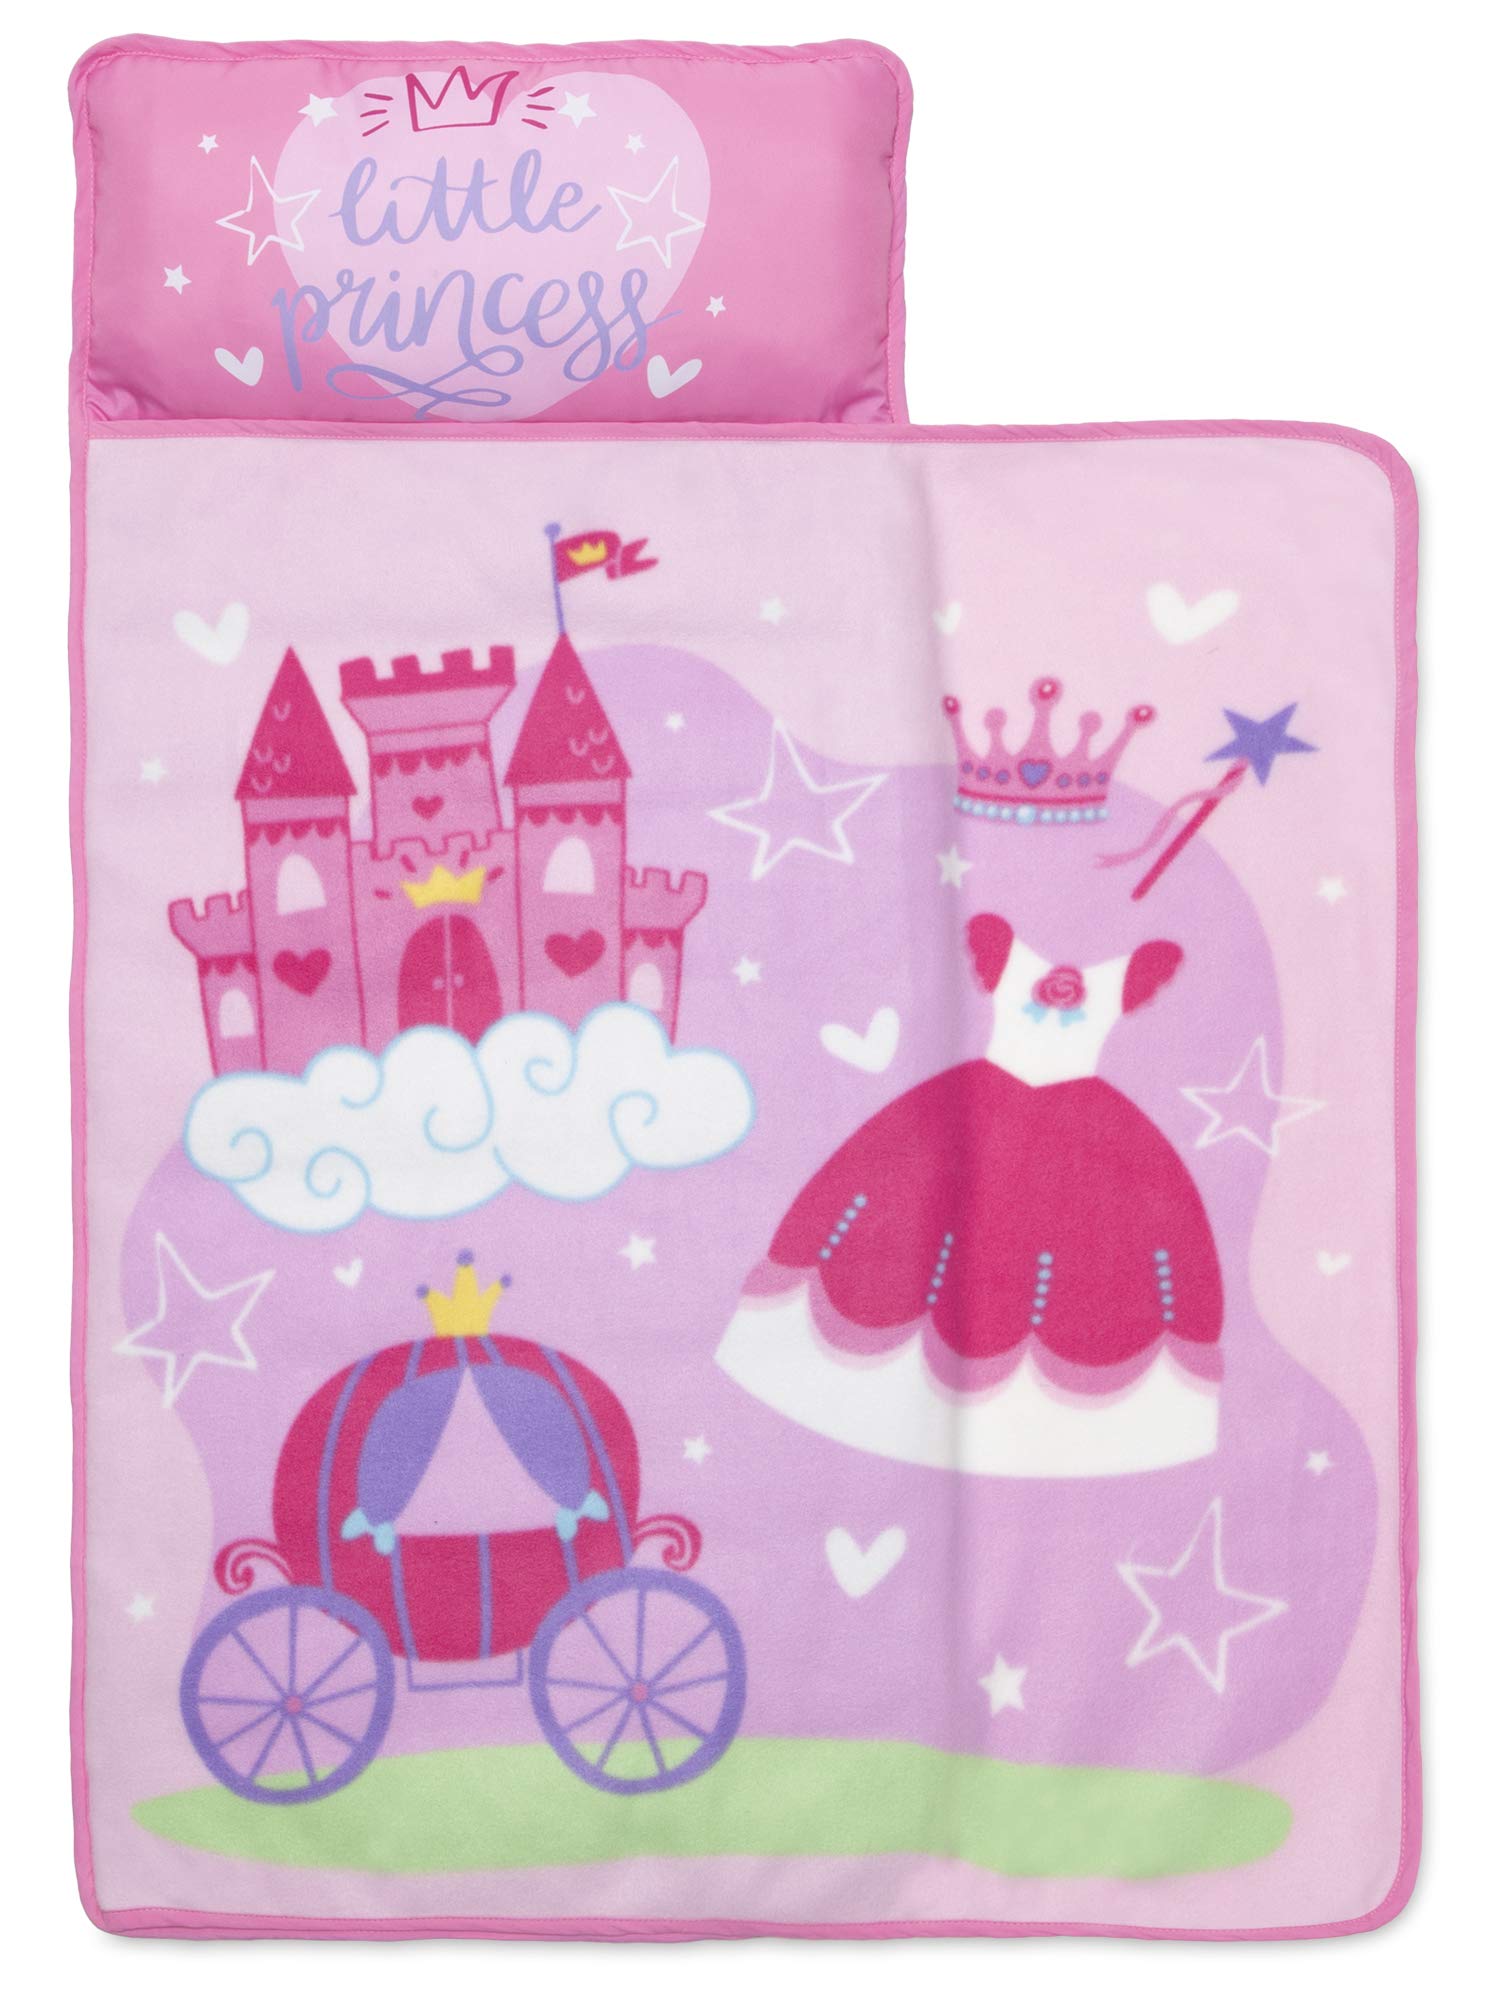 Baby Boom Funhouse Little Princess Kids Nap Mat Set - Includes Pillow and Fleece Blanket - great for girls Napping During Daycare, Prescho